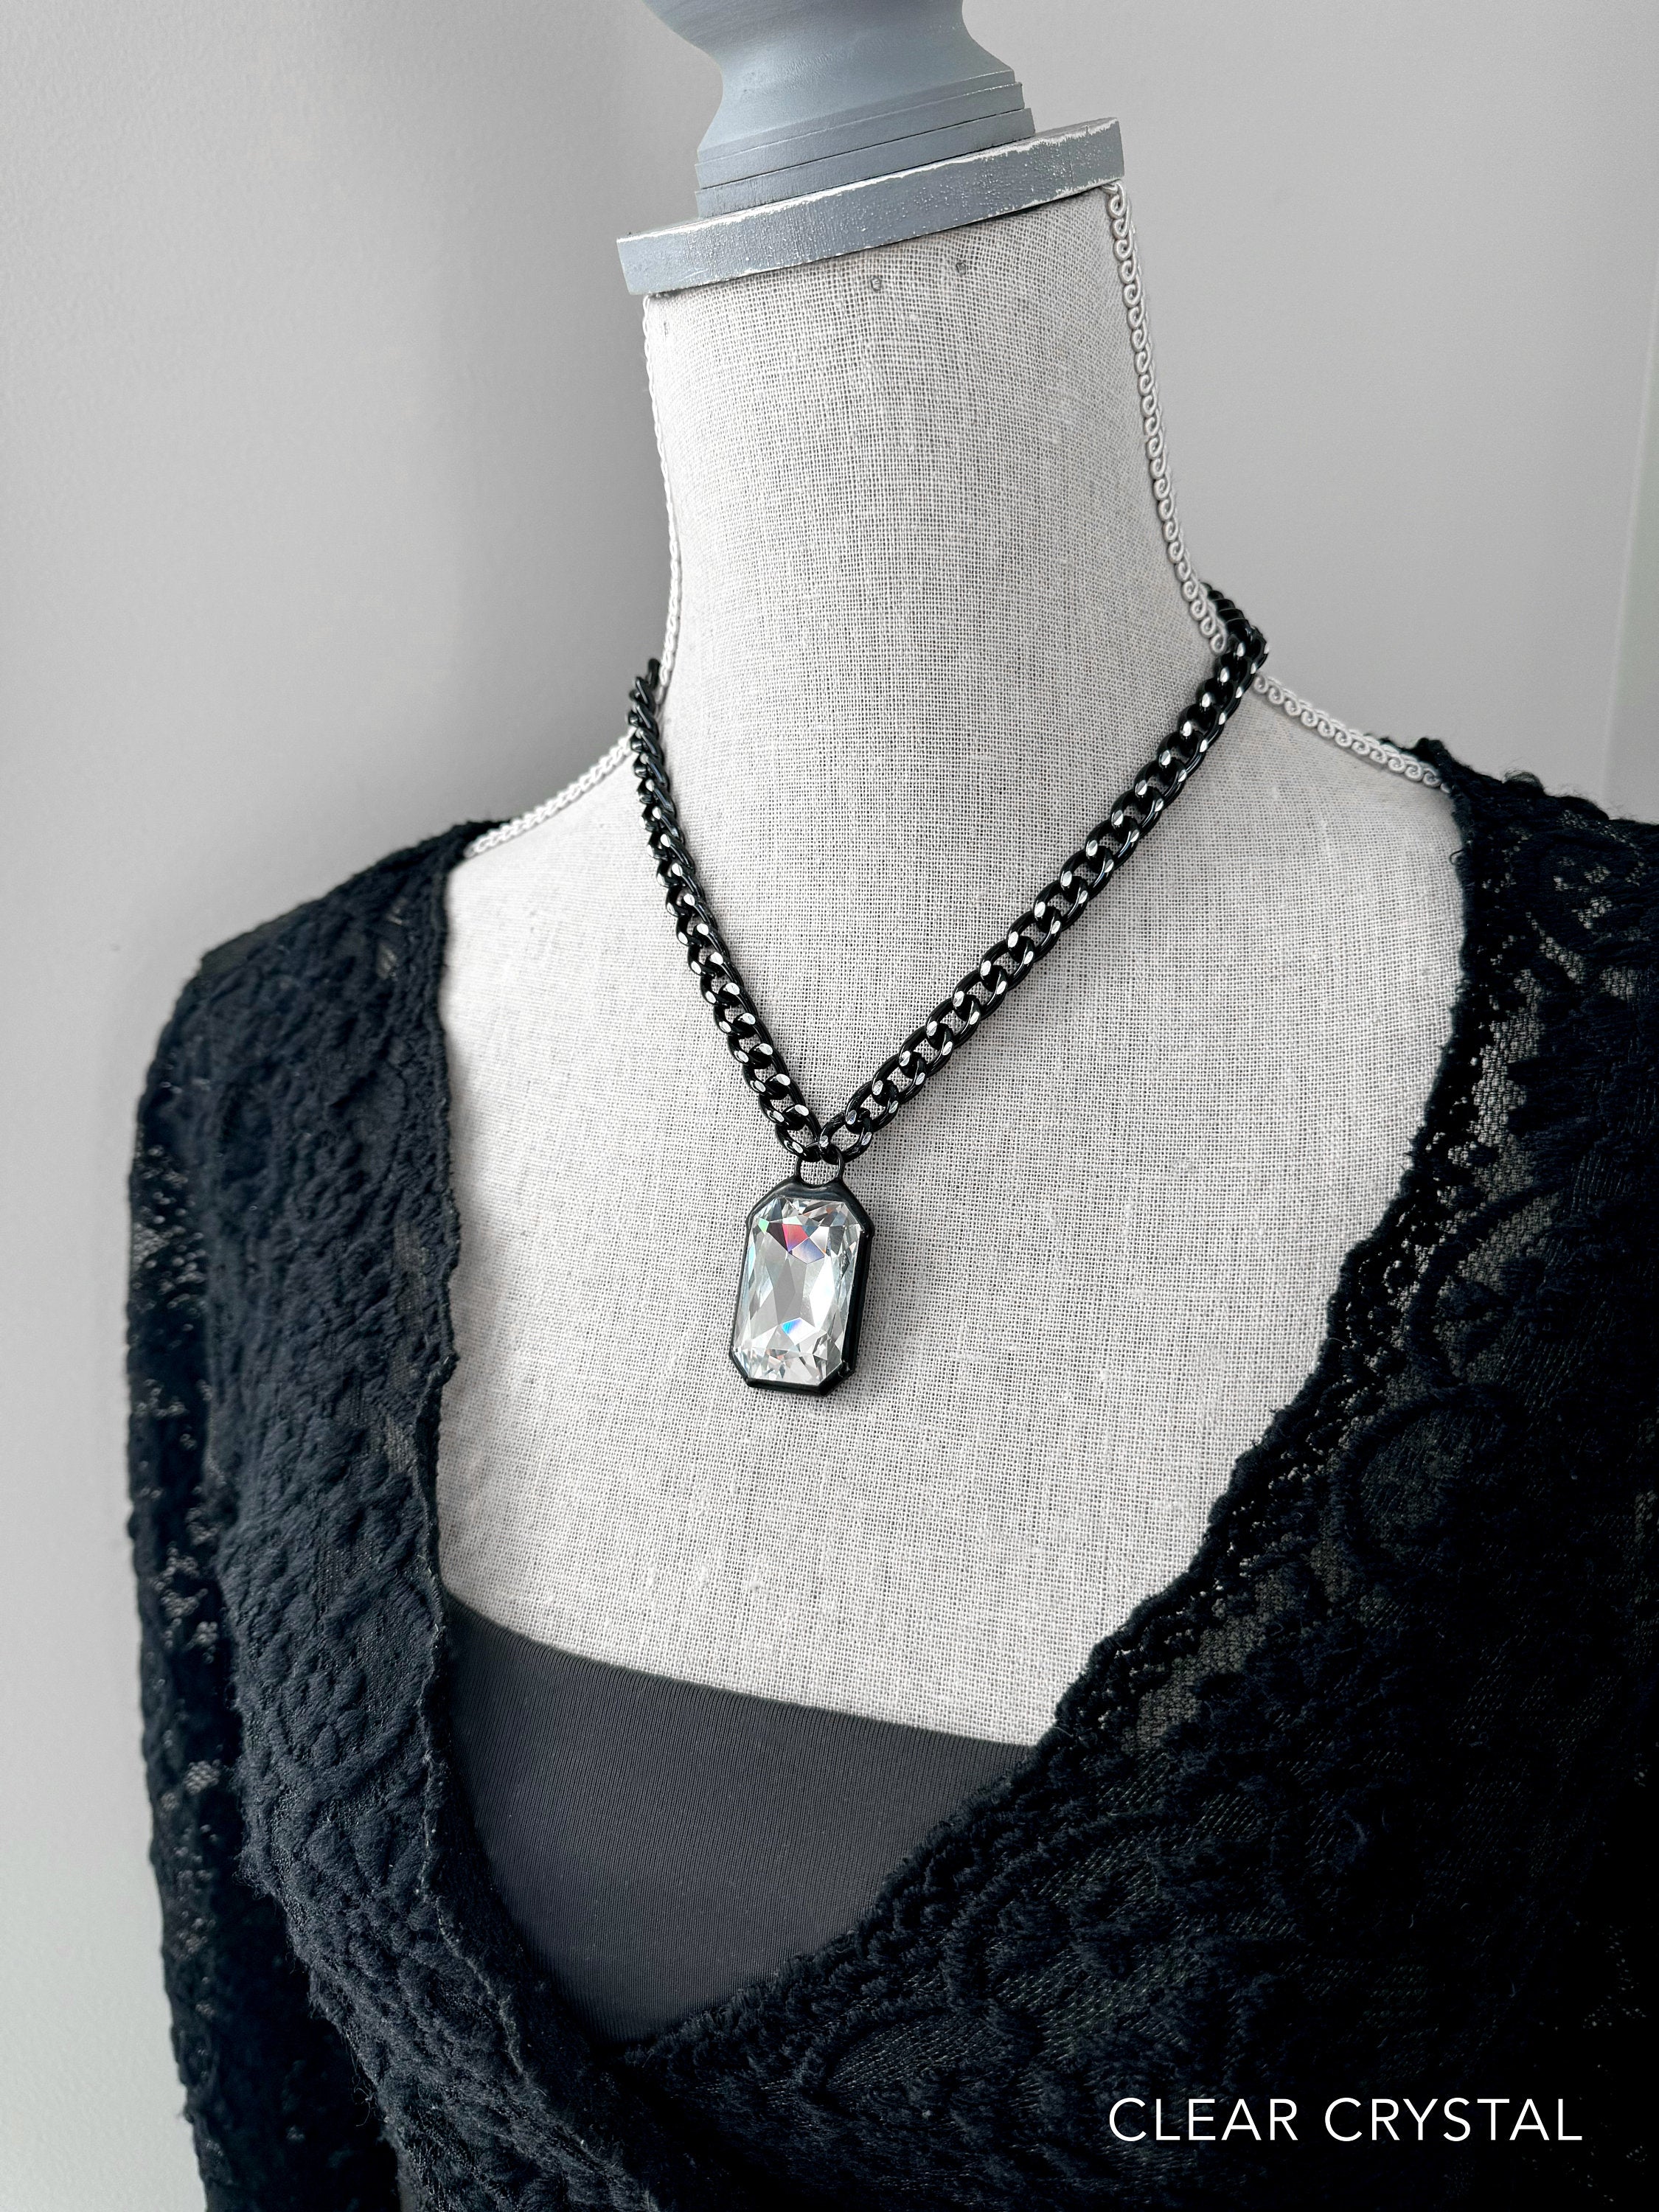 EMERGE - Large Clear Crystal Pendant Necklace, Thick Silver Black Chain, Hand Soldered Black Bezel - Bold Statement Necklace, Modern Jewelry